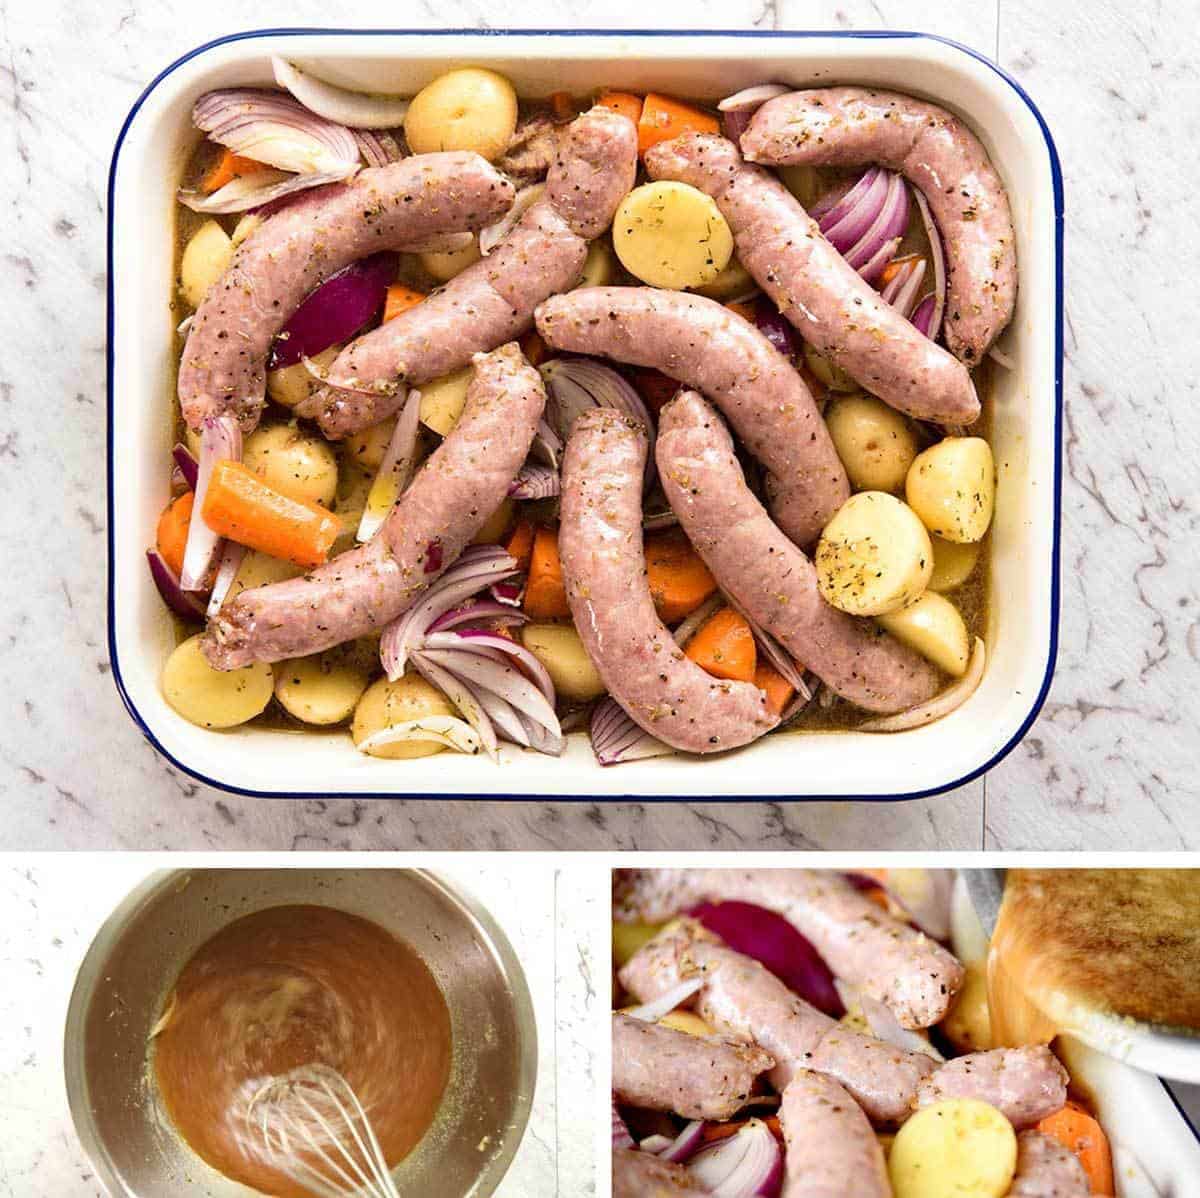 How to make Sausage Bake with Vegetables and Gravy